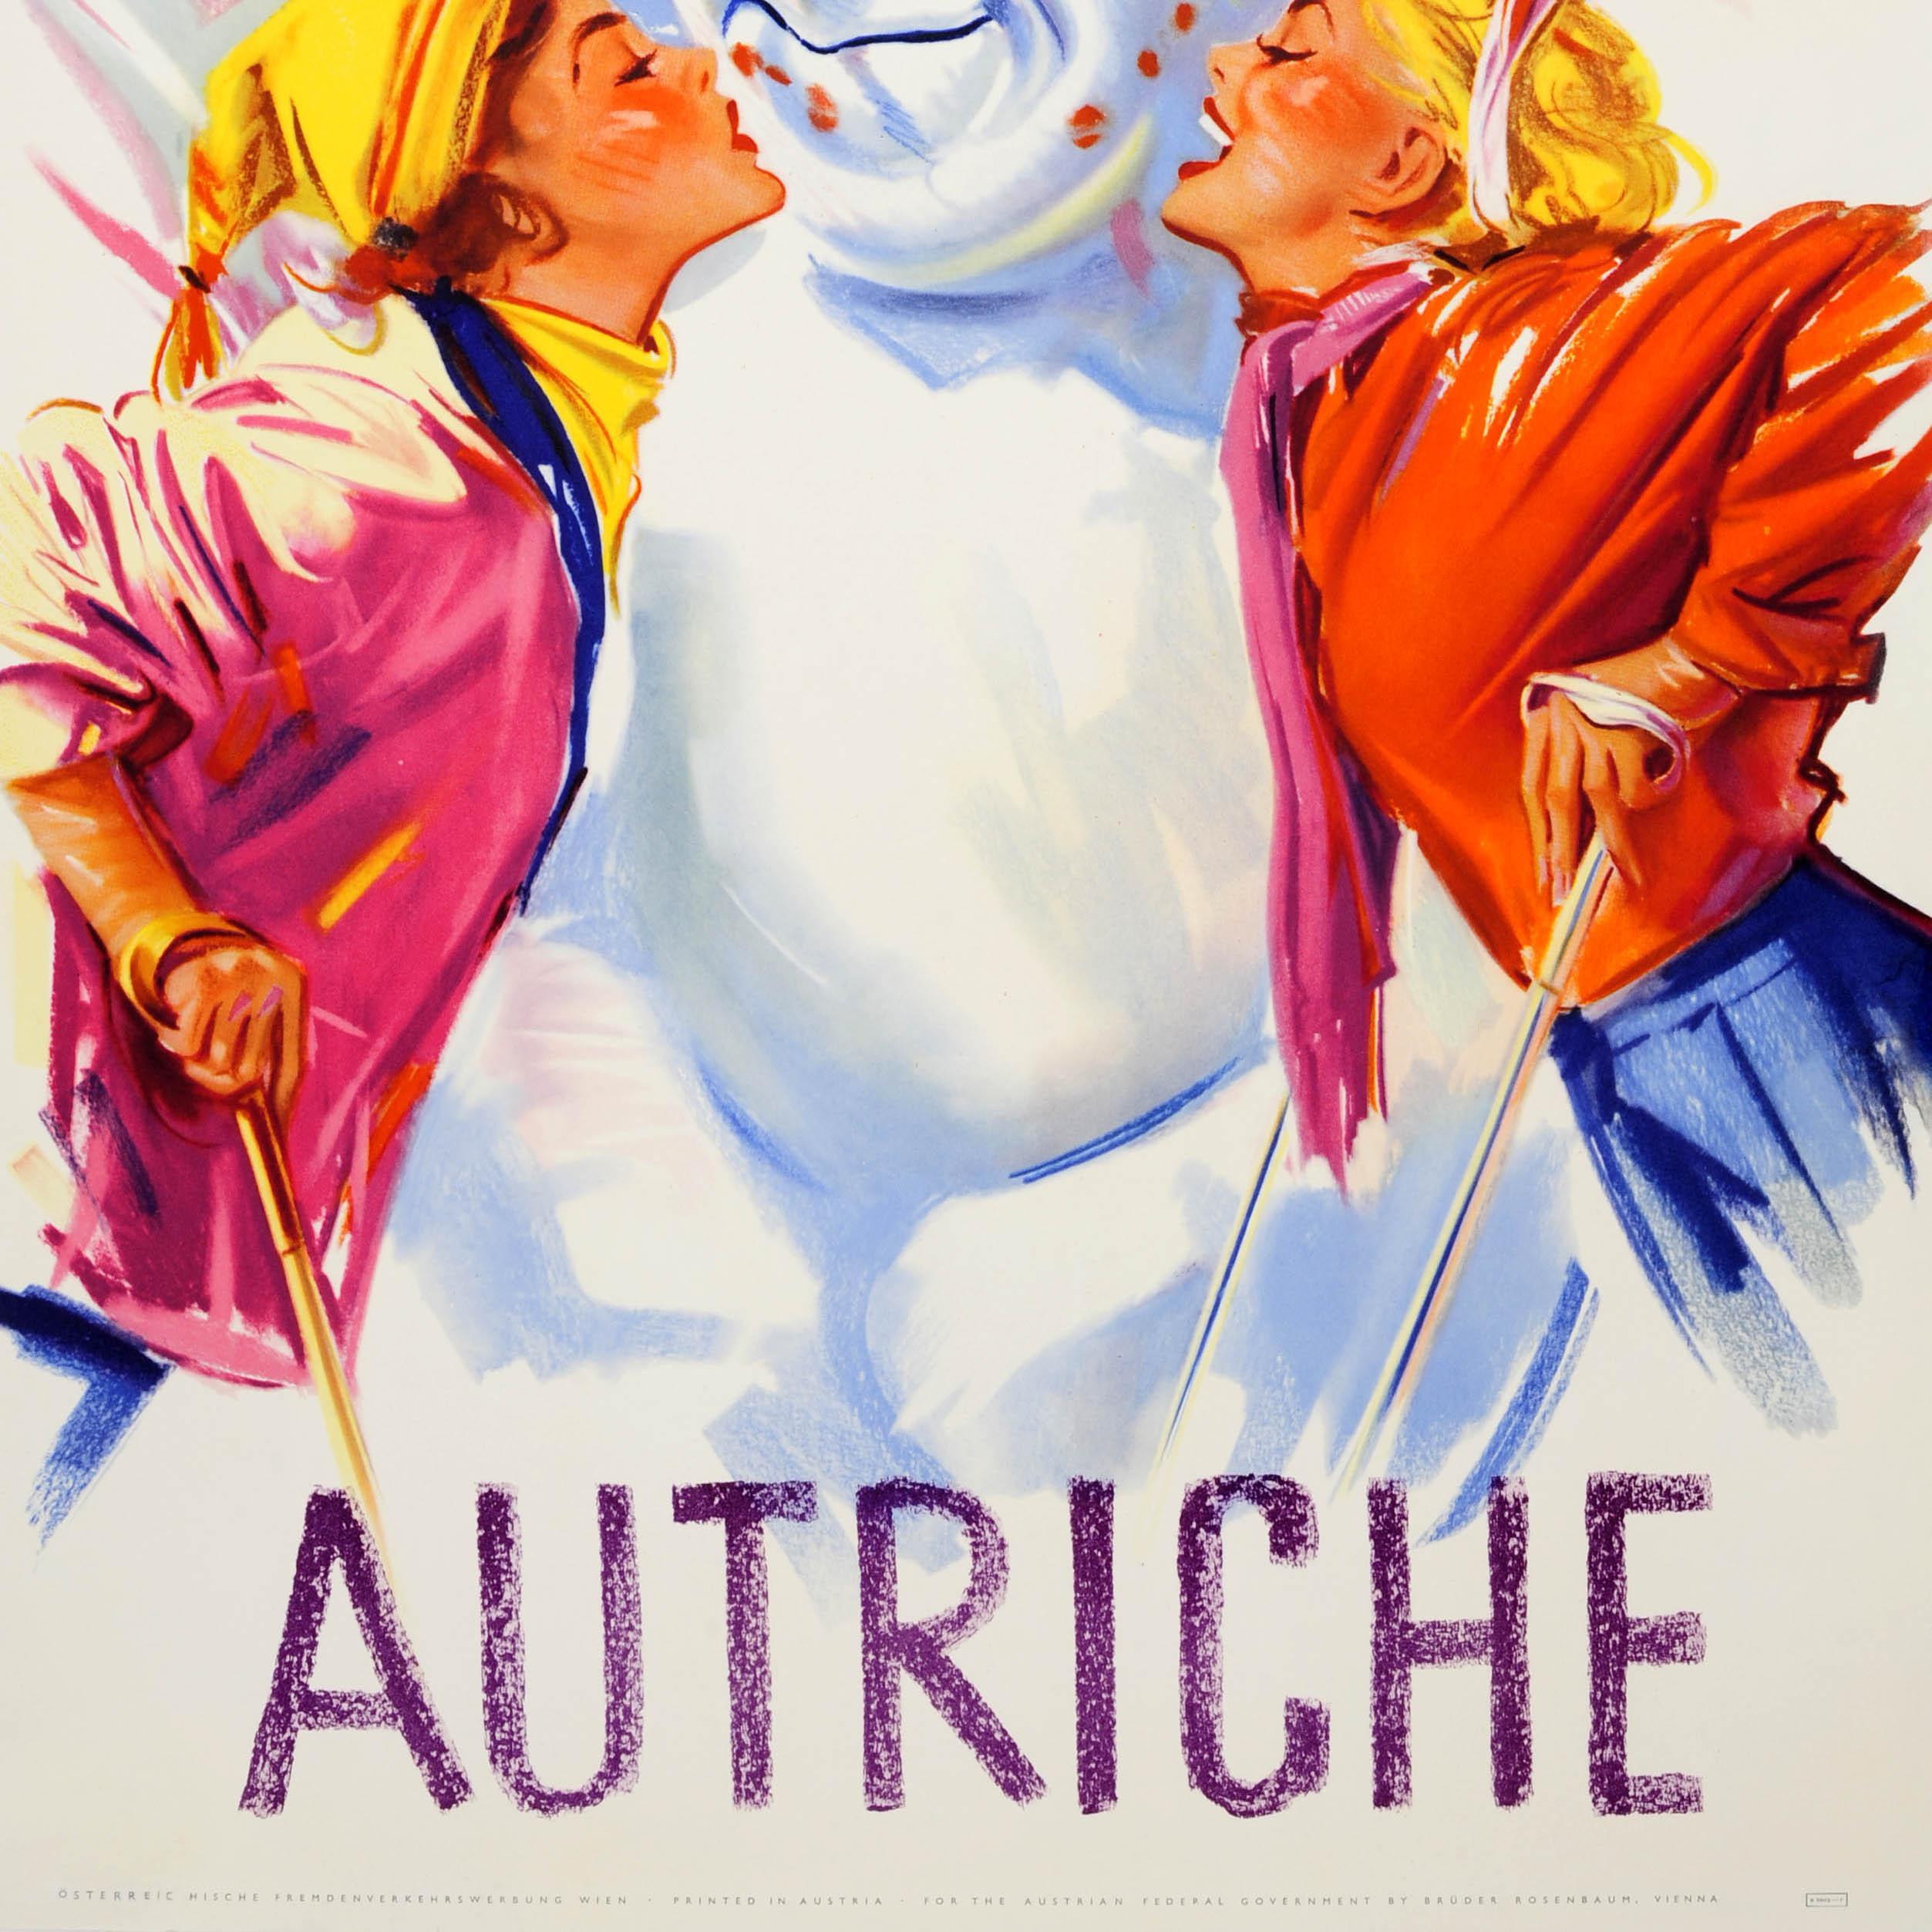 Original vintage winter sport and skiing poster for Austria / Autriche featuring a fun image of two young ladies leaning on their ski poles and covering a smiling snowman with kisses in front of the mountains and blue sky in the background. Printed